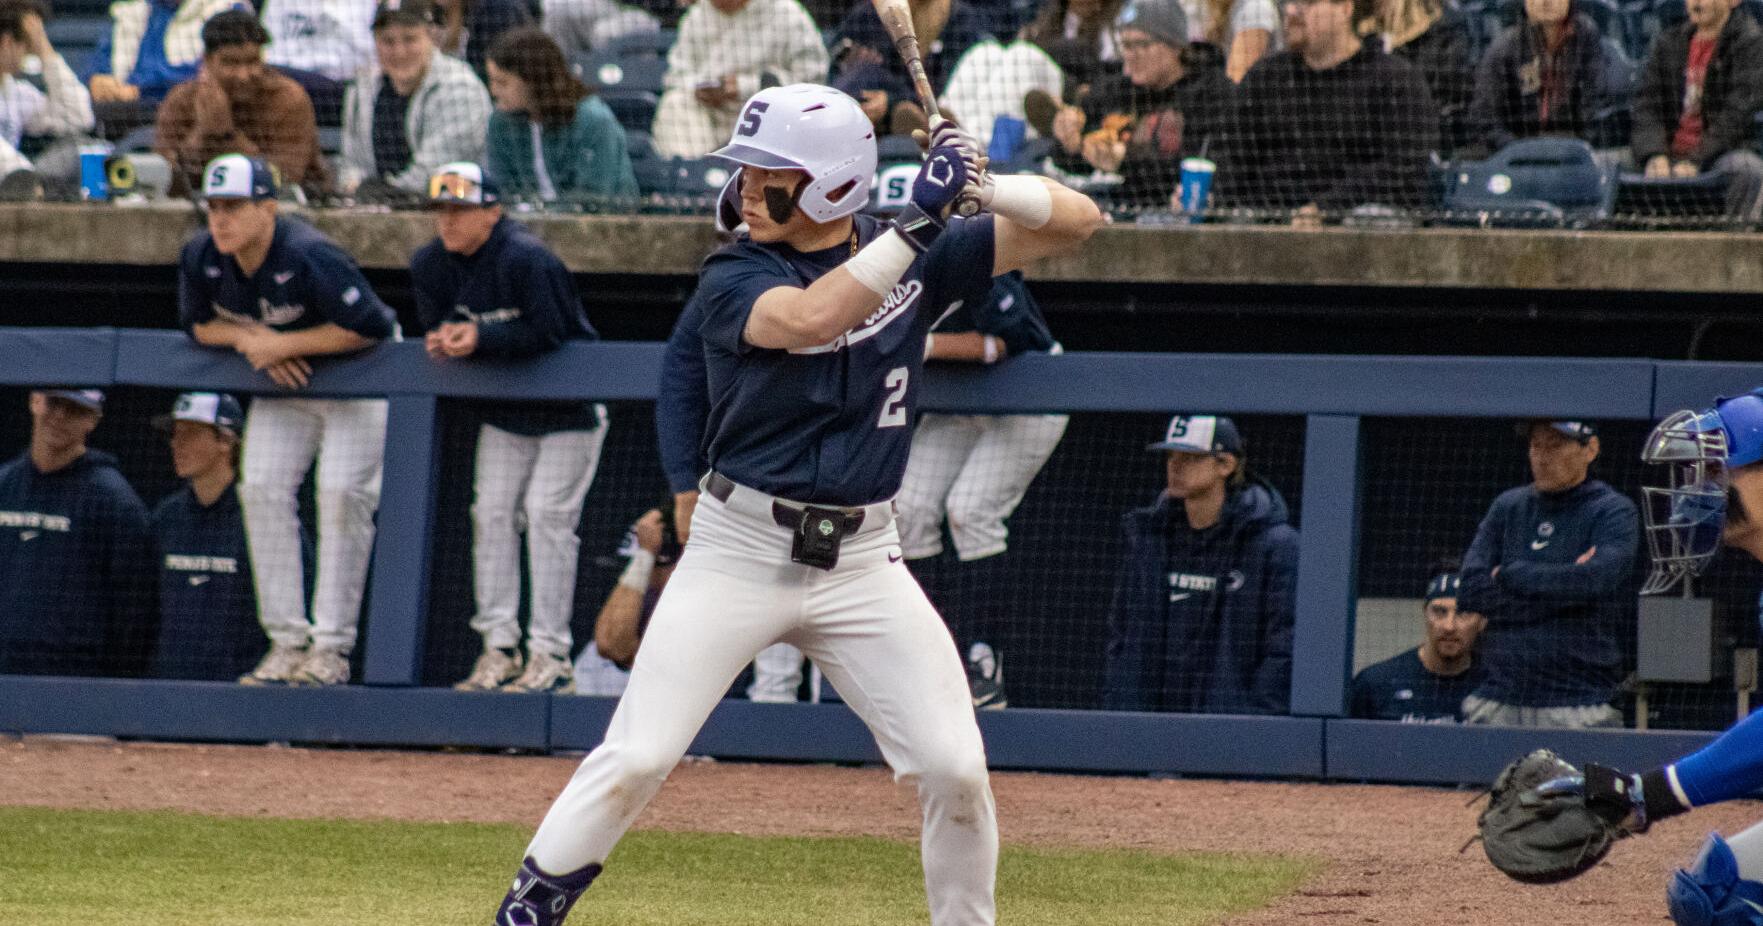 Offensive approach, 7-run inning lead Penn State baseball to victory over Pitt